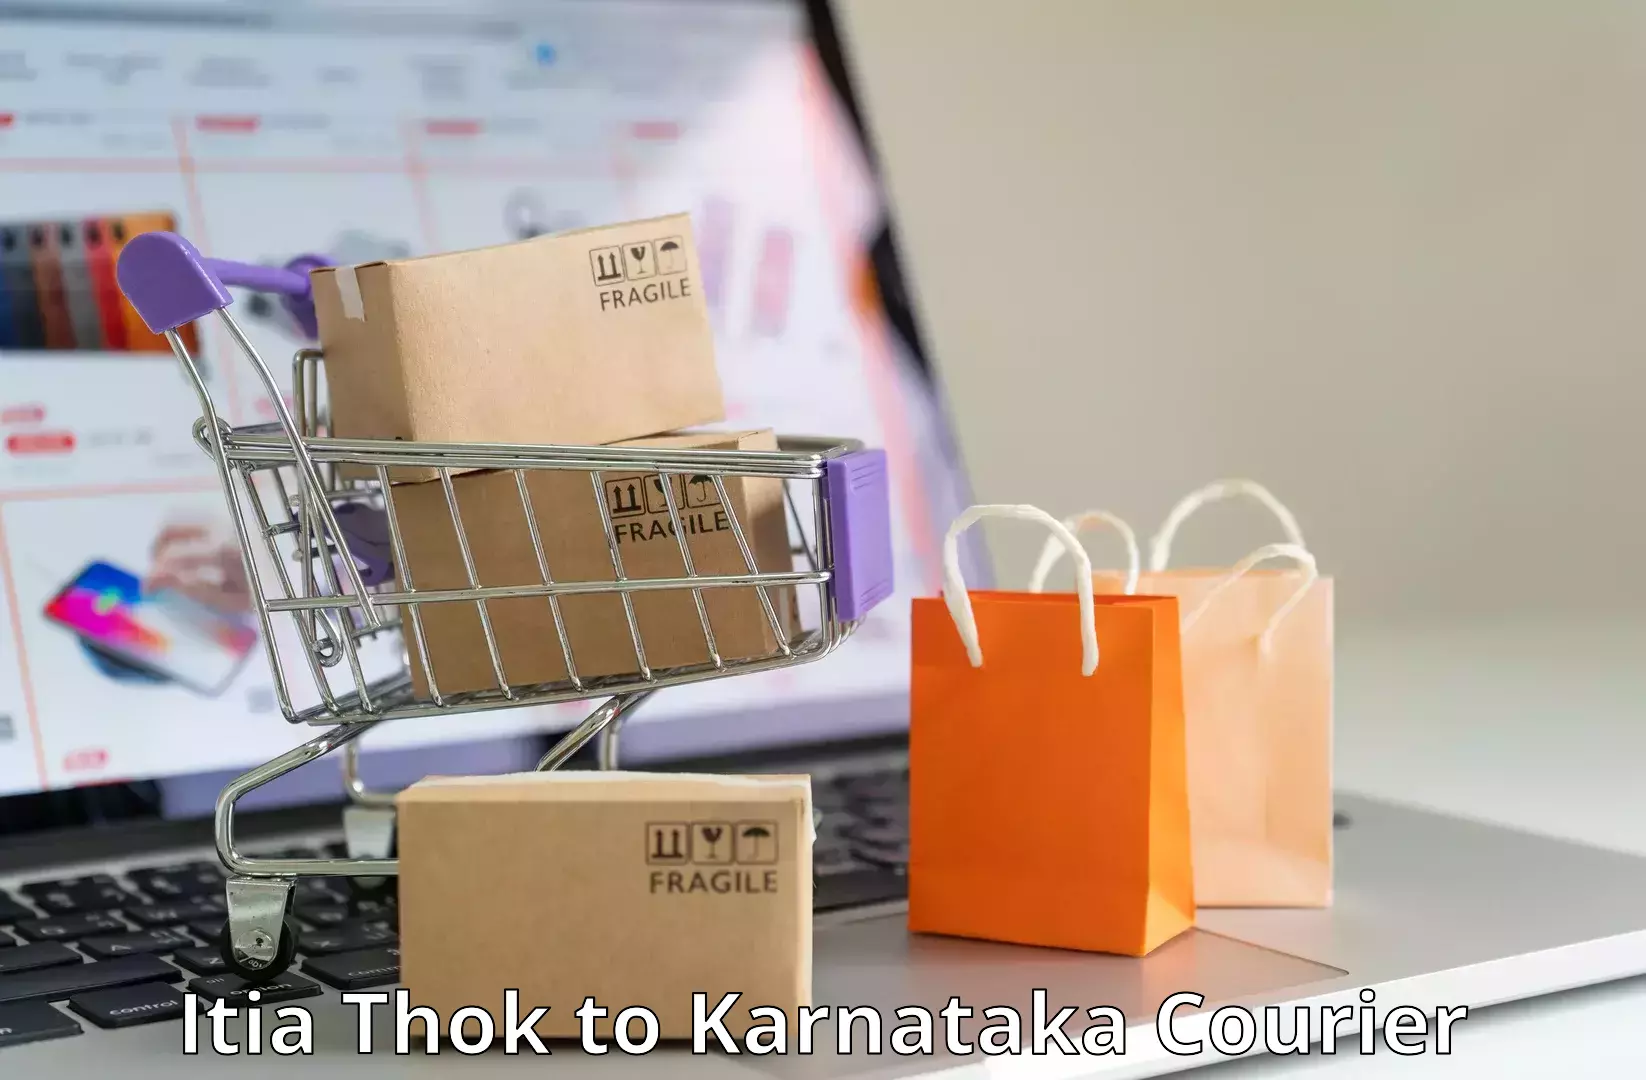 On-call courier service Itia Thok to Ullal